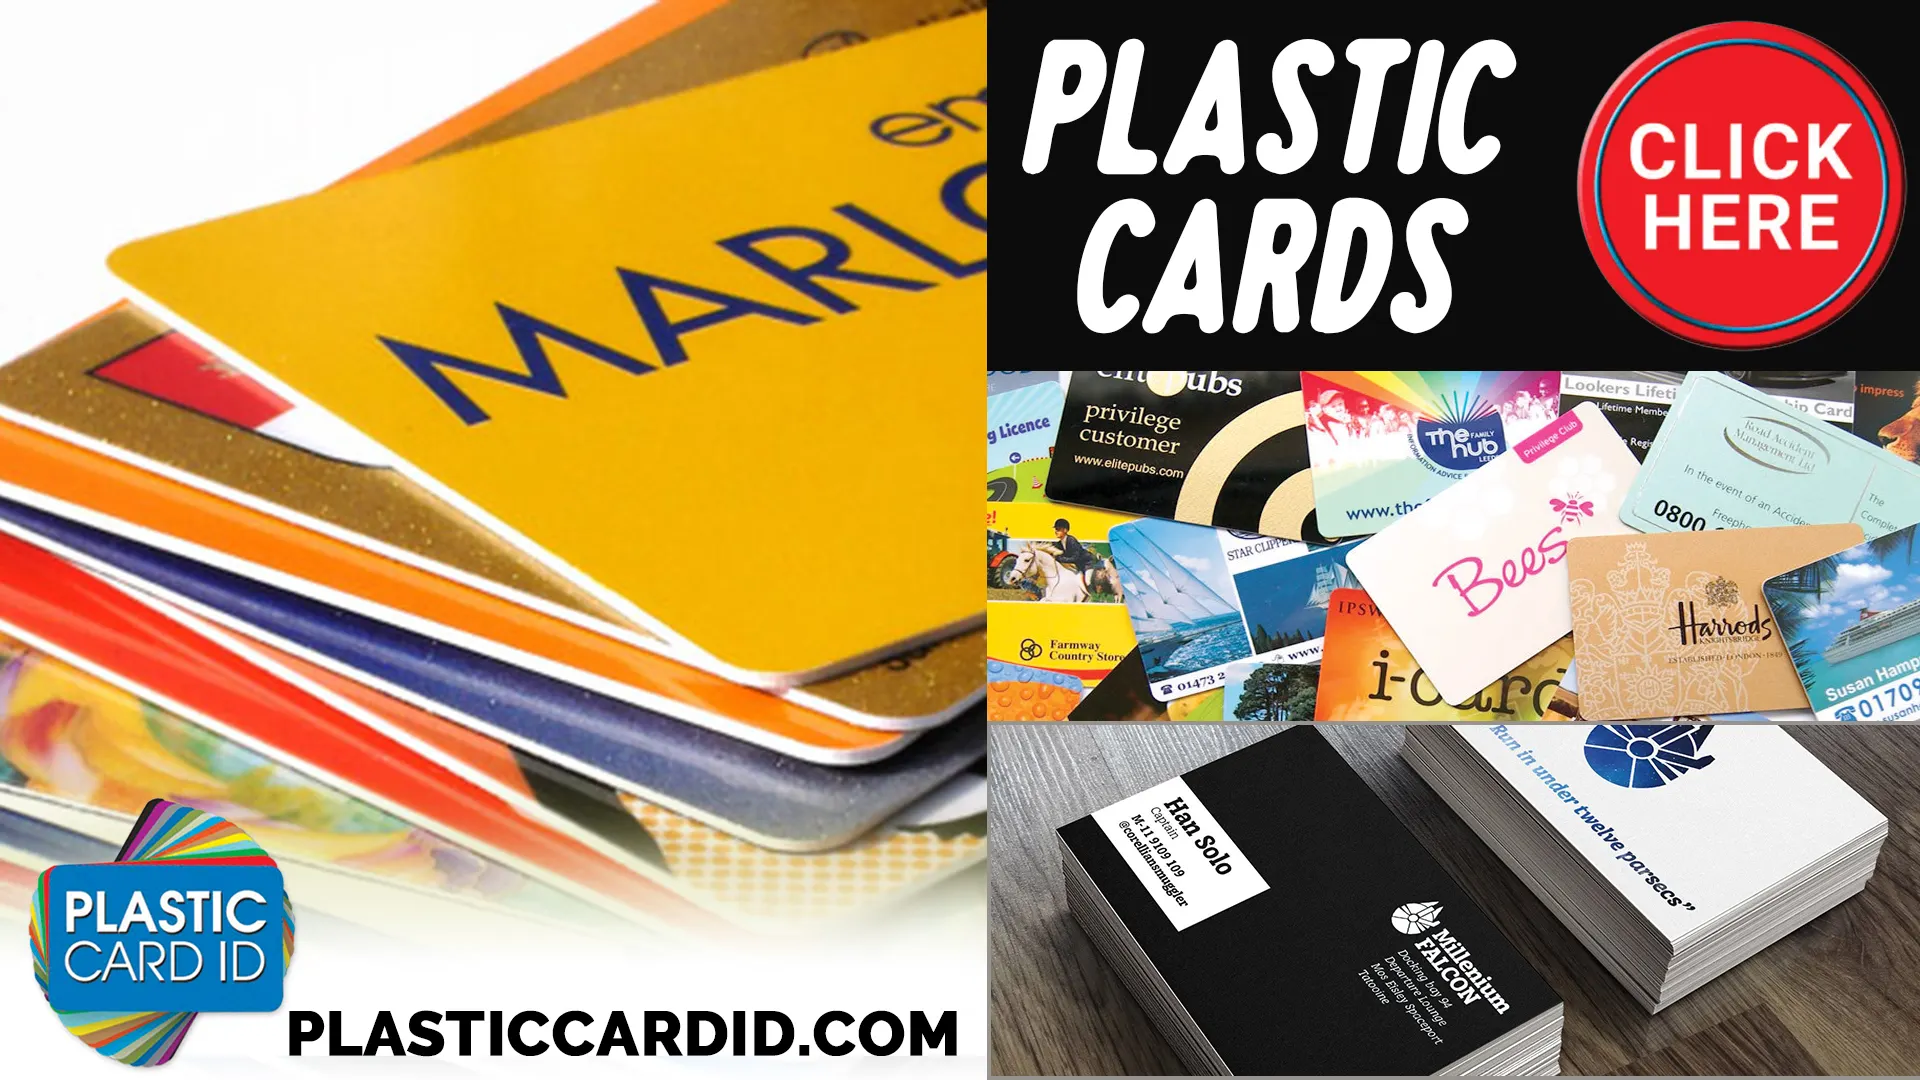 The Global Reach of Plastic Cards